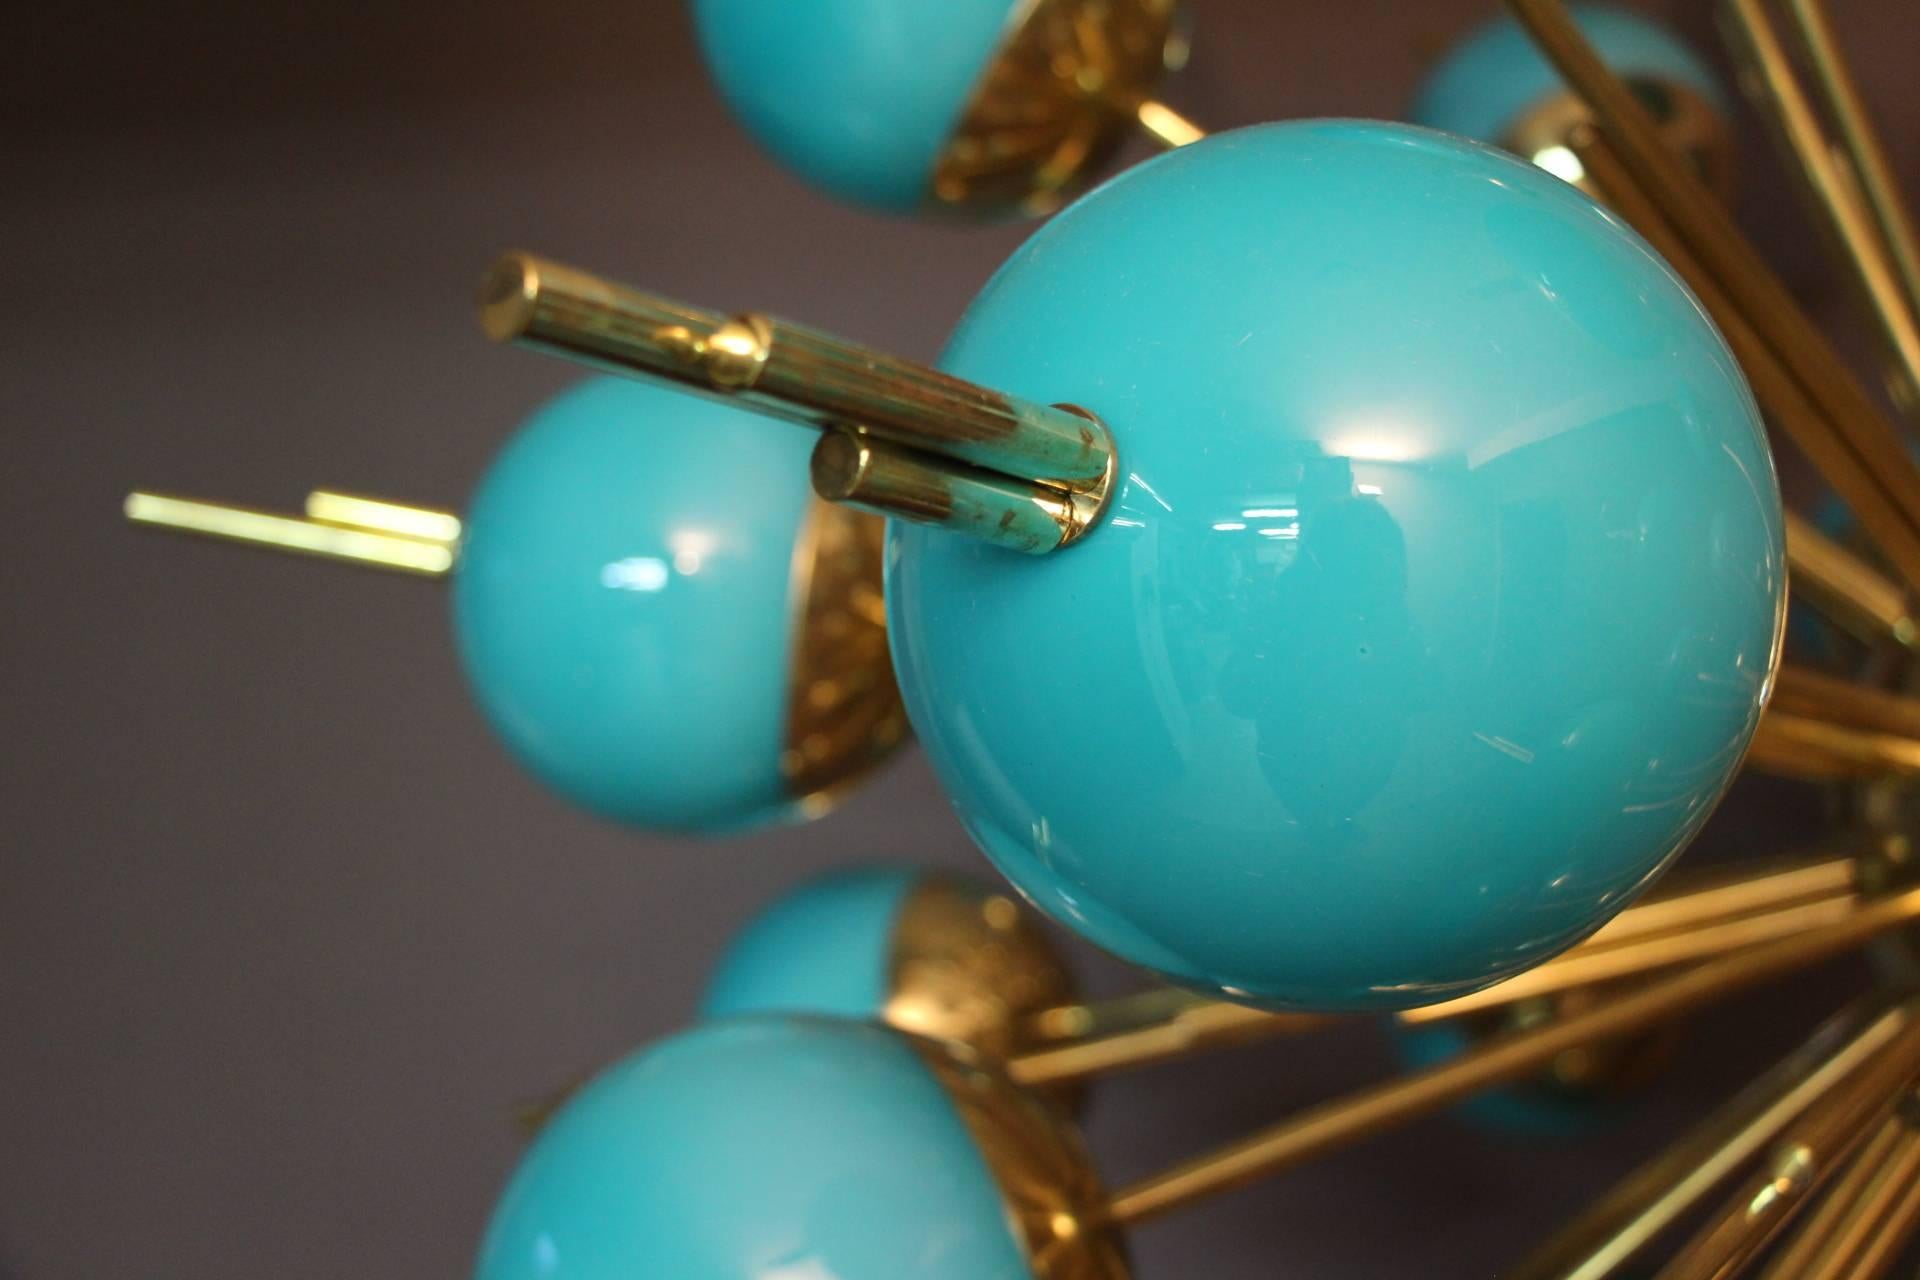 This very unusual Sputnik chandelier features 30 turquoise glass globes mounted on brass rods. When the light is on, its turquoise globes turn to light blue color and it is still magnificent.